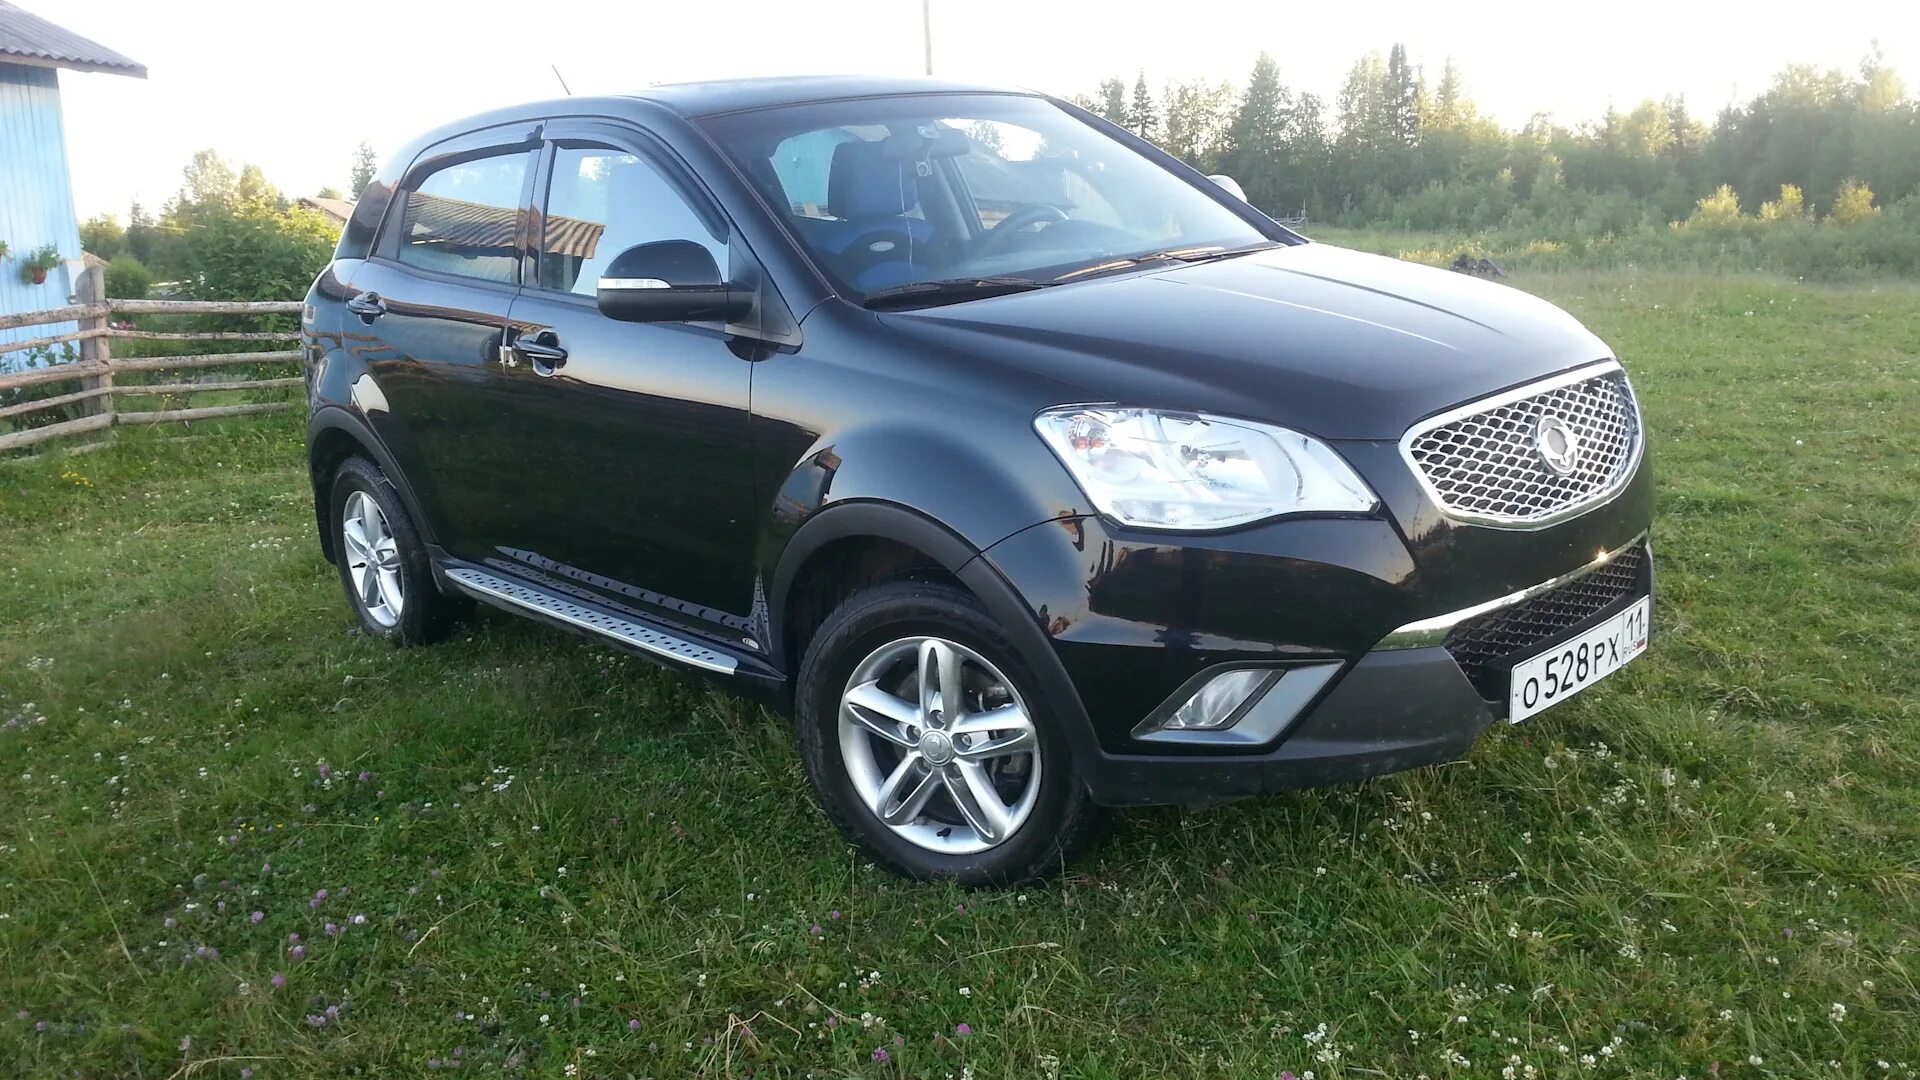 SSANGYONG Actyon (2g). Санг енг Актион 2. Саньенг Актион 2013 2.0 дизель. SSANGYONG Actyon Elegance. Актион уфа